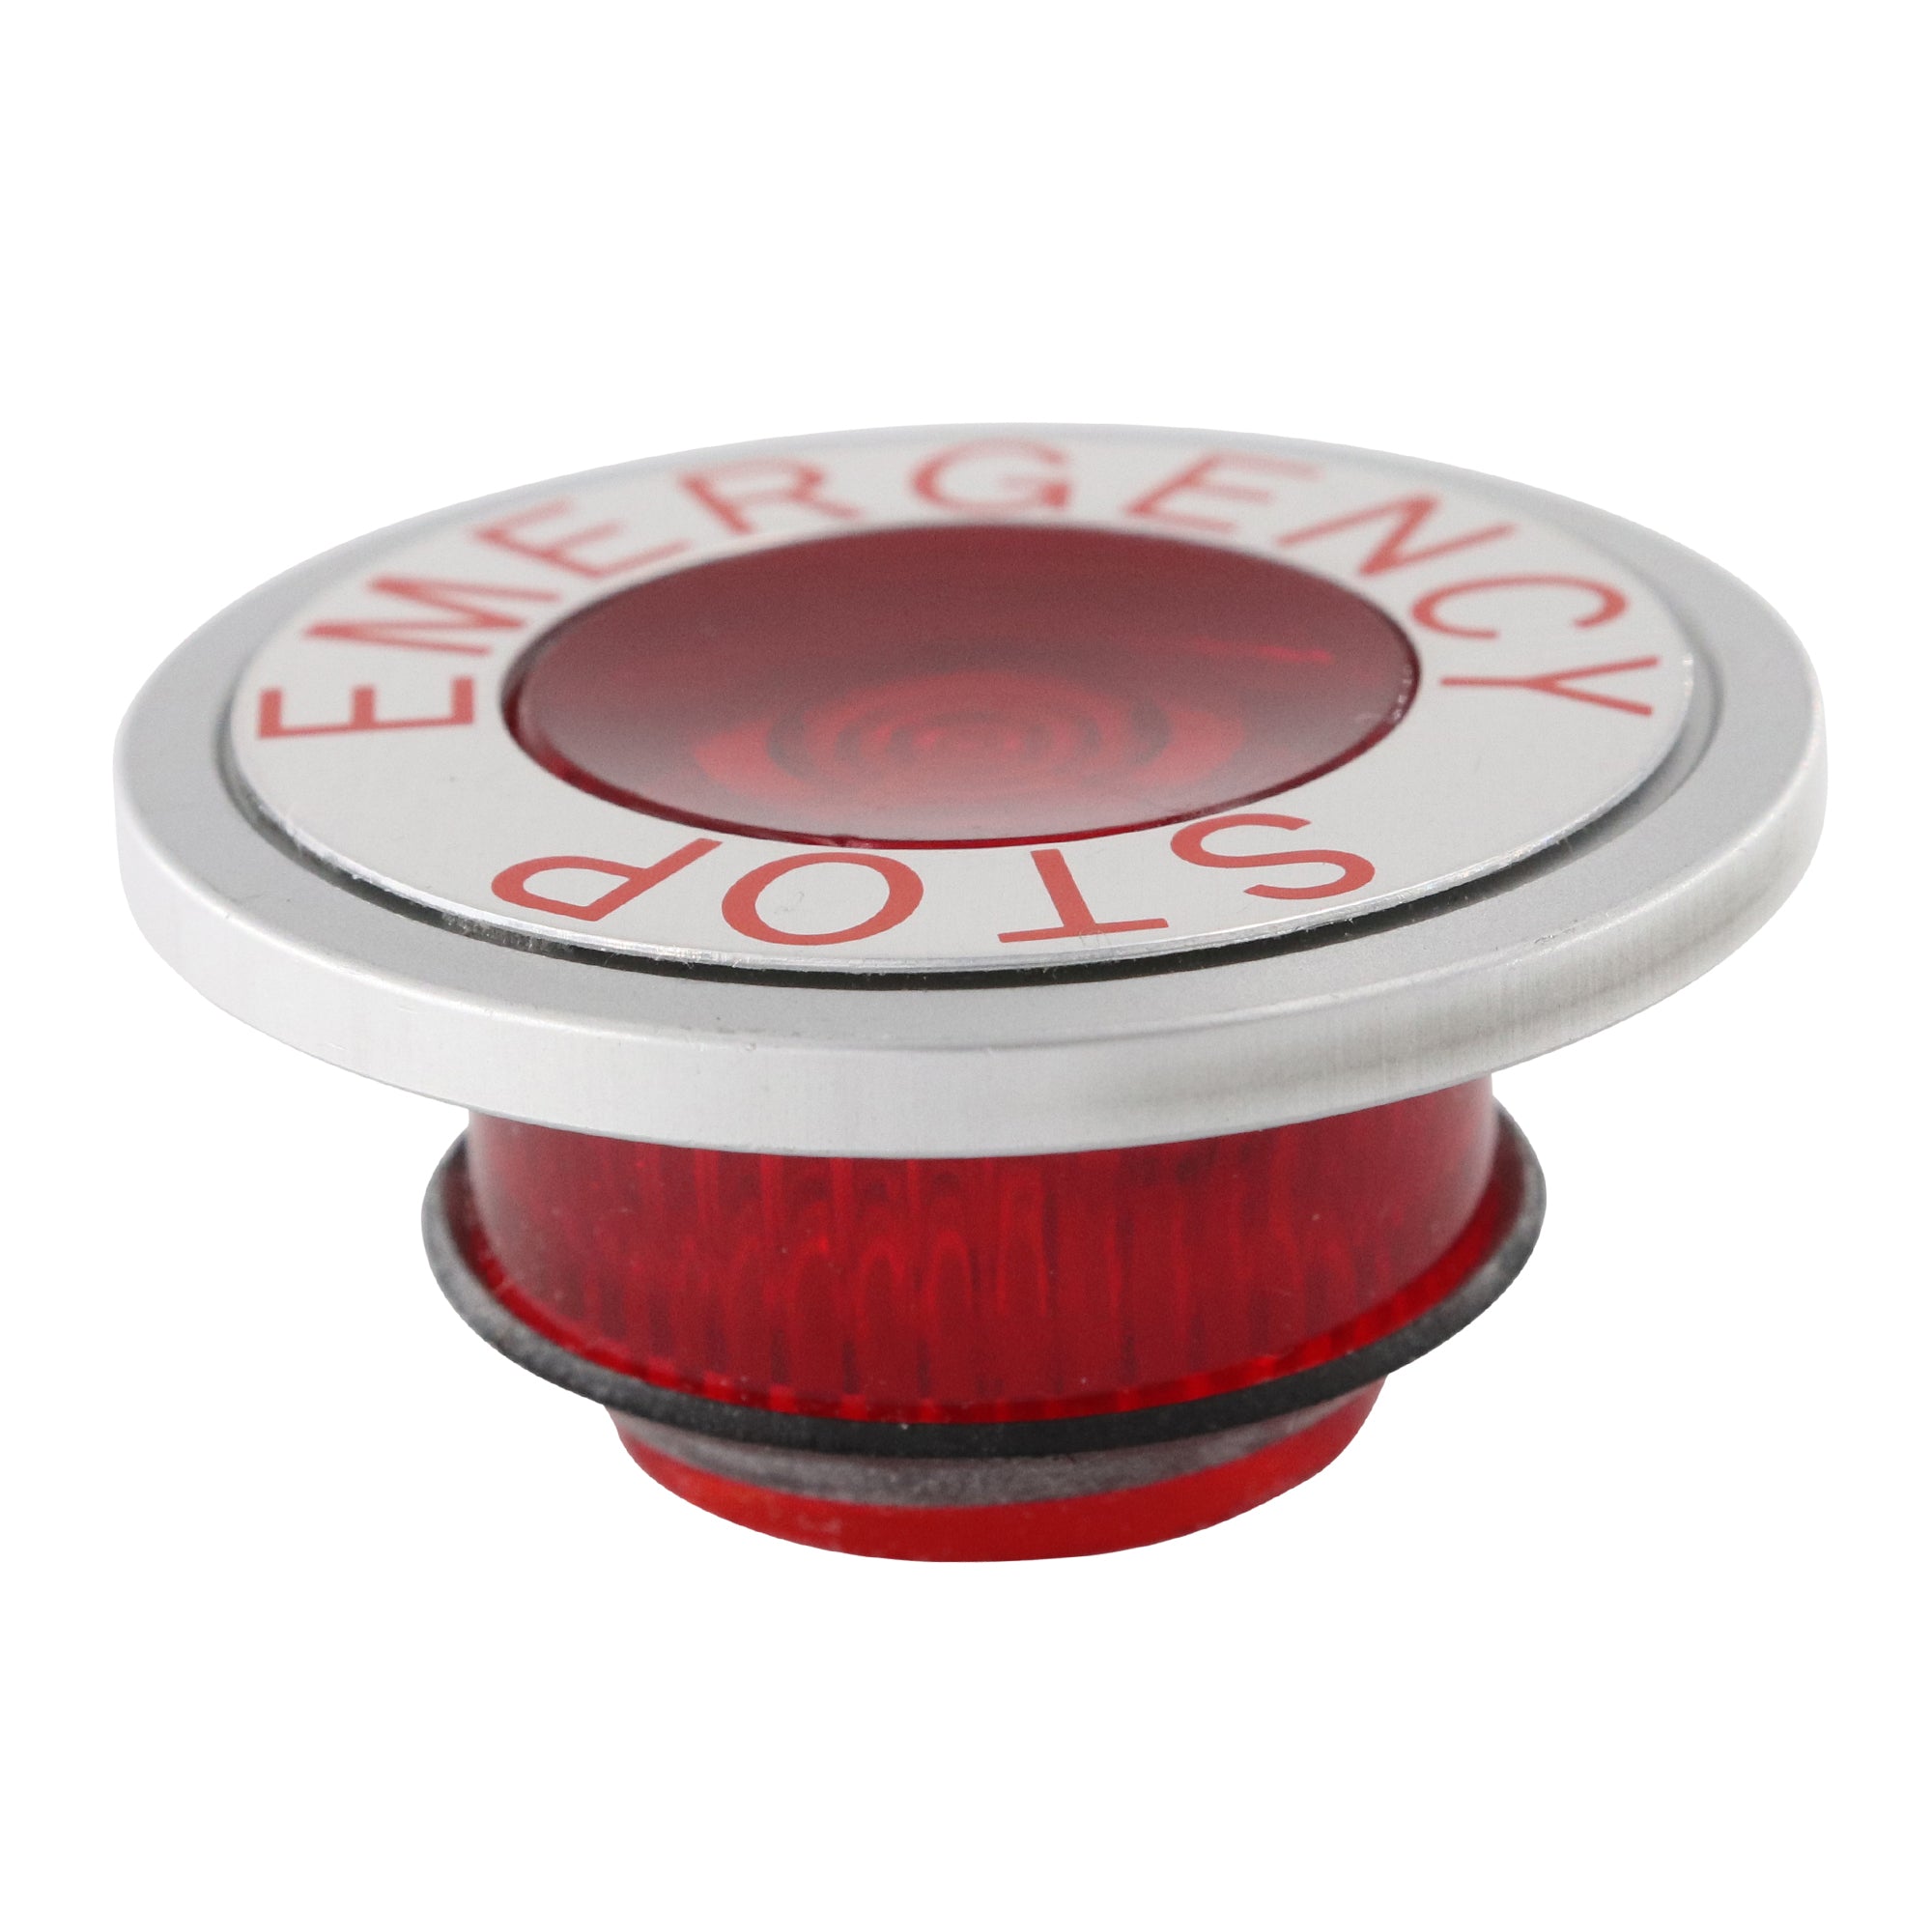 EATON, EATON 10250TC63 EMERGENCY STOP PUSH-PULL BUTTON PLASTIC LENS, SIDE LIGHTED, RED